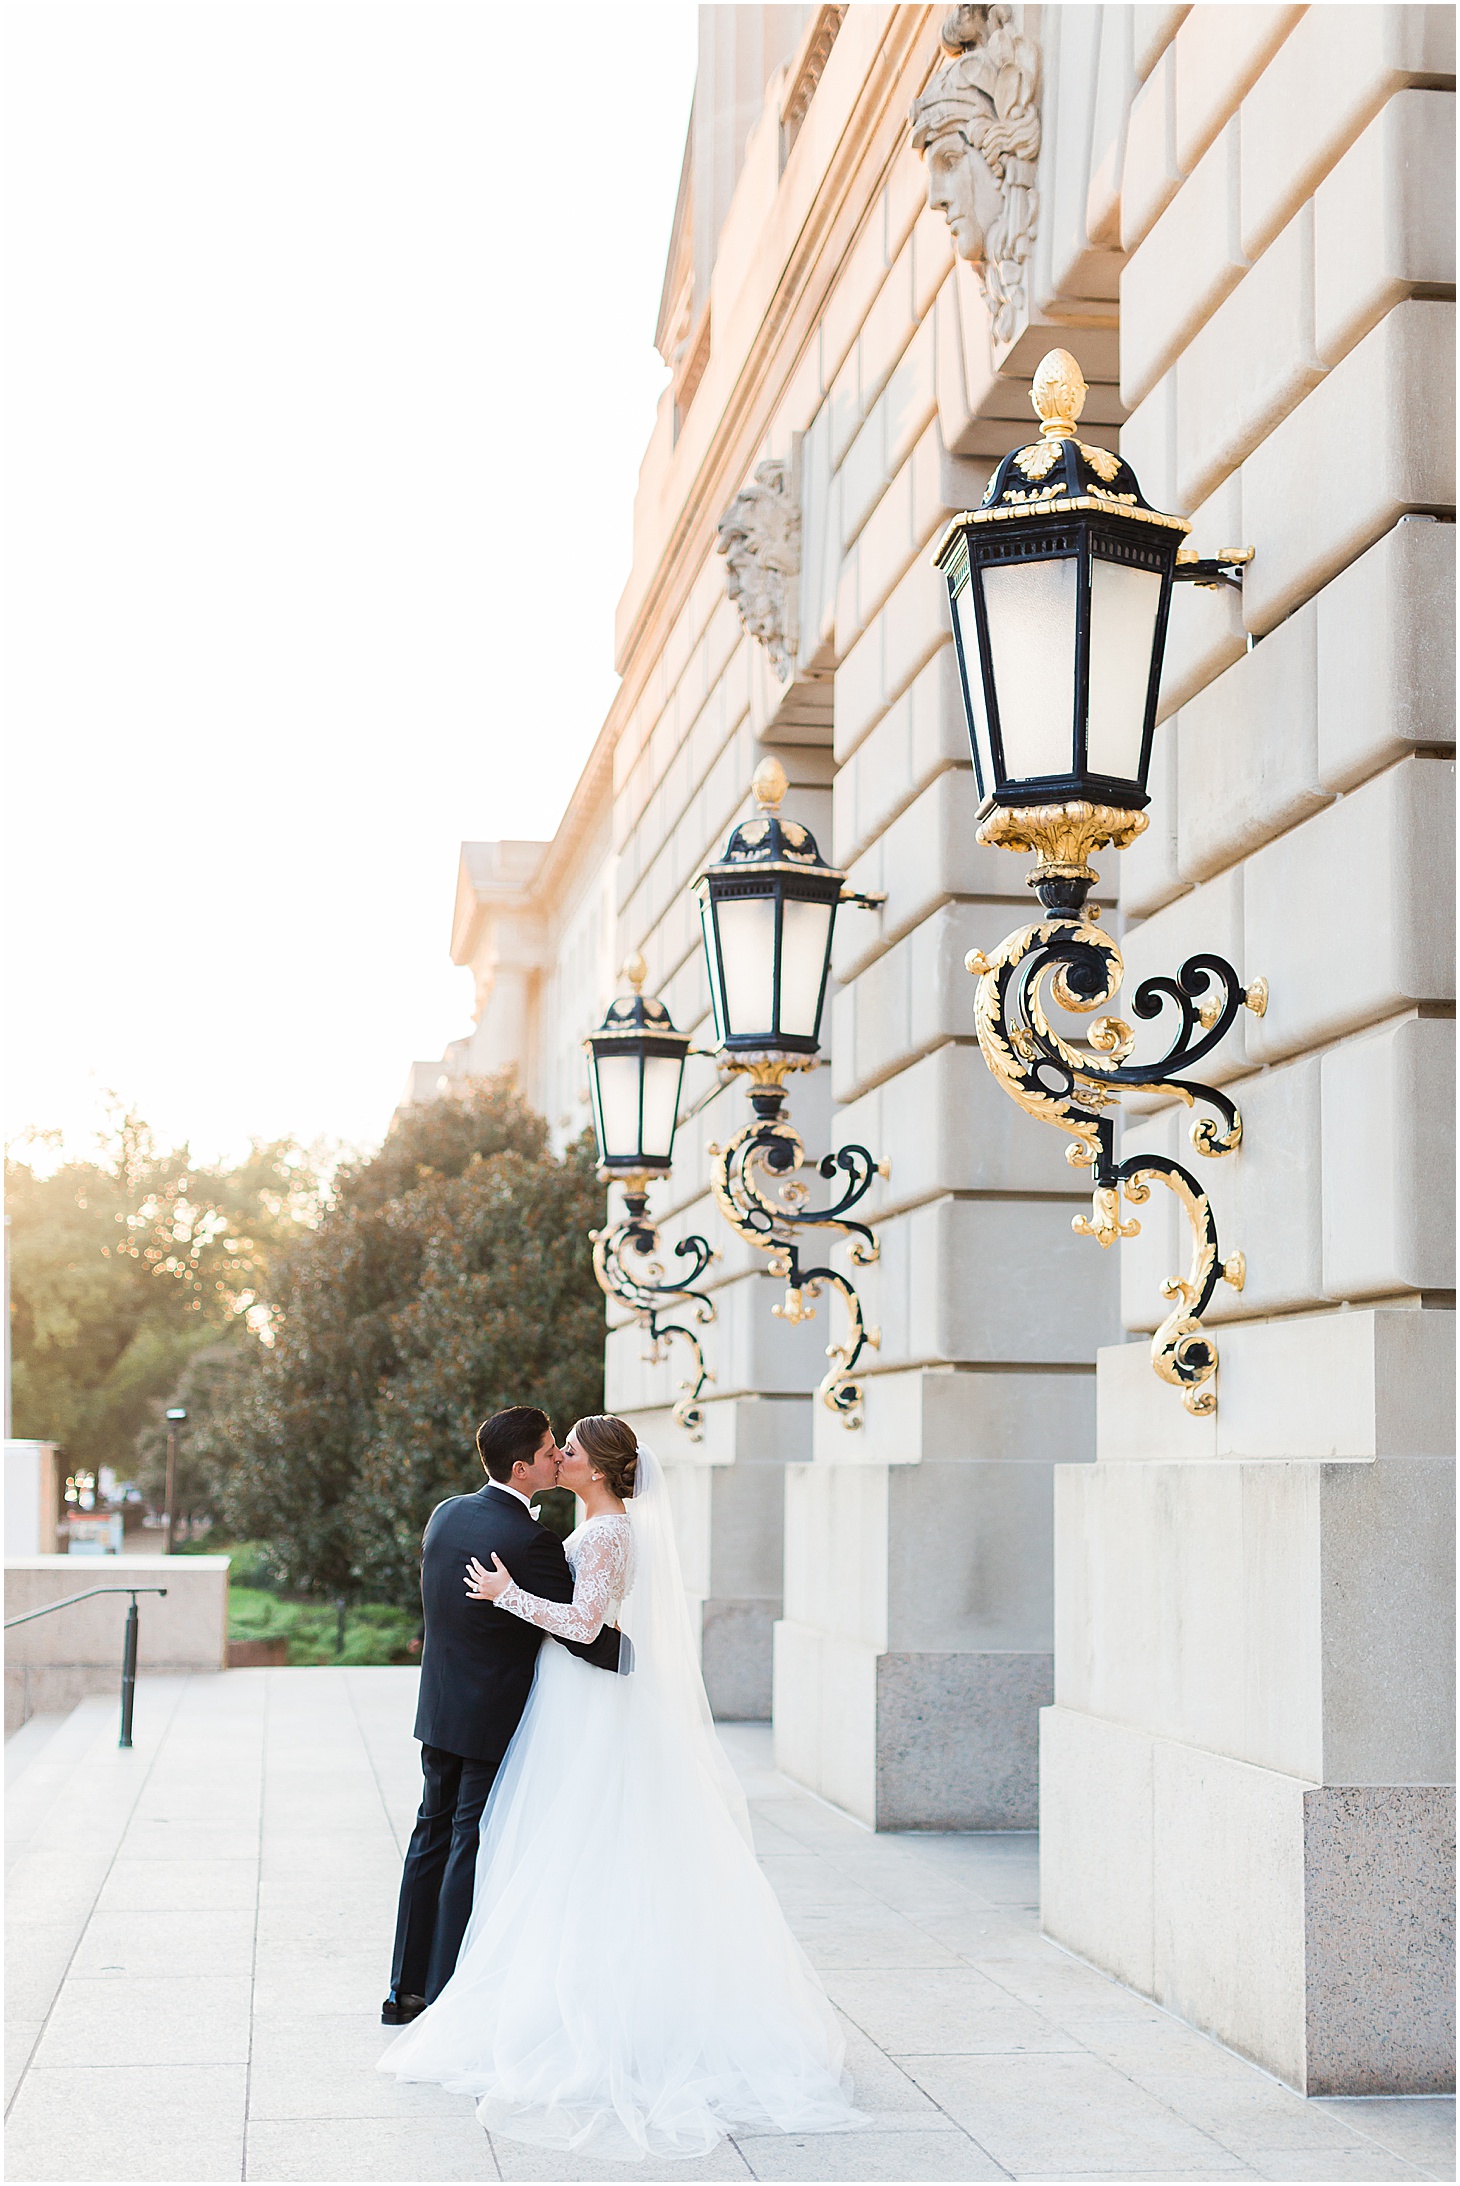 Wedding Portraits at Andrew W. Mellon Auditorium, Ceremony at the Shrine of the Most Blessed Sacrament, Sarah Bradshaw Photography, DC Wedding Photographer